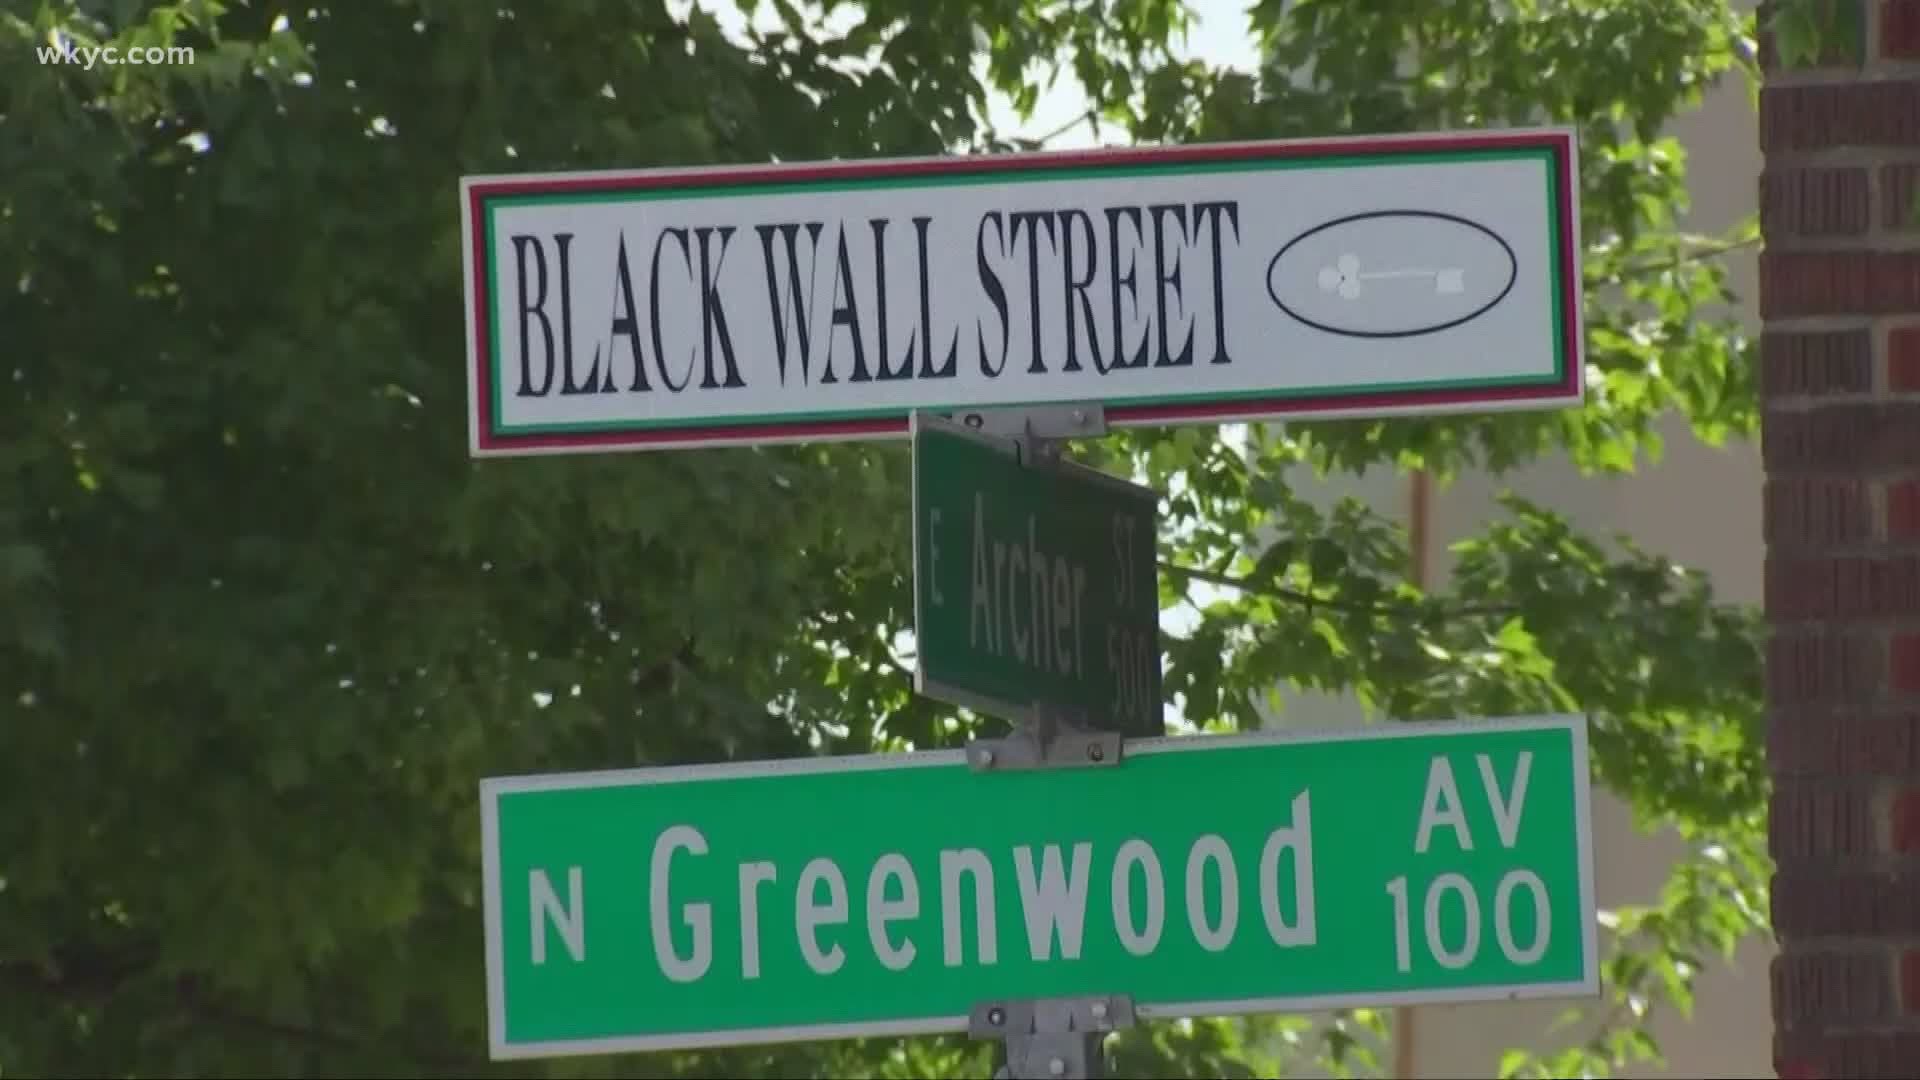 Ever heard of Black Wall Street? Brandon Simmons tells us about the history of "Black Wall Street," and the example it sets for African Americans in business today.